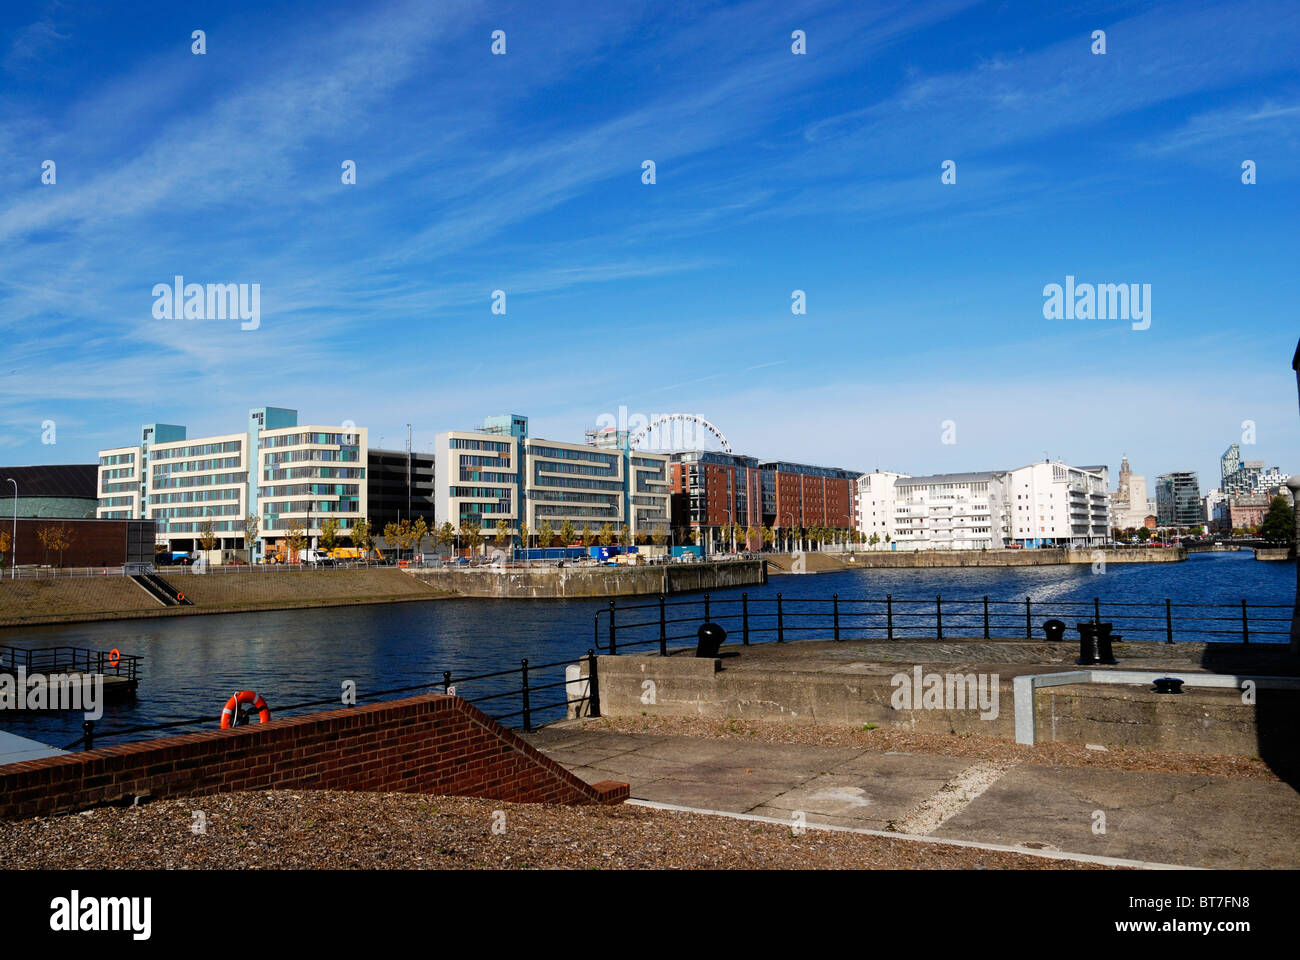 Wapping Quay in Liverpool Docks - regenerated area close to the city centre / Albert Dock / Liverpool Arena attractions. Stock Photo